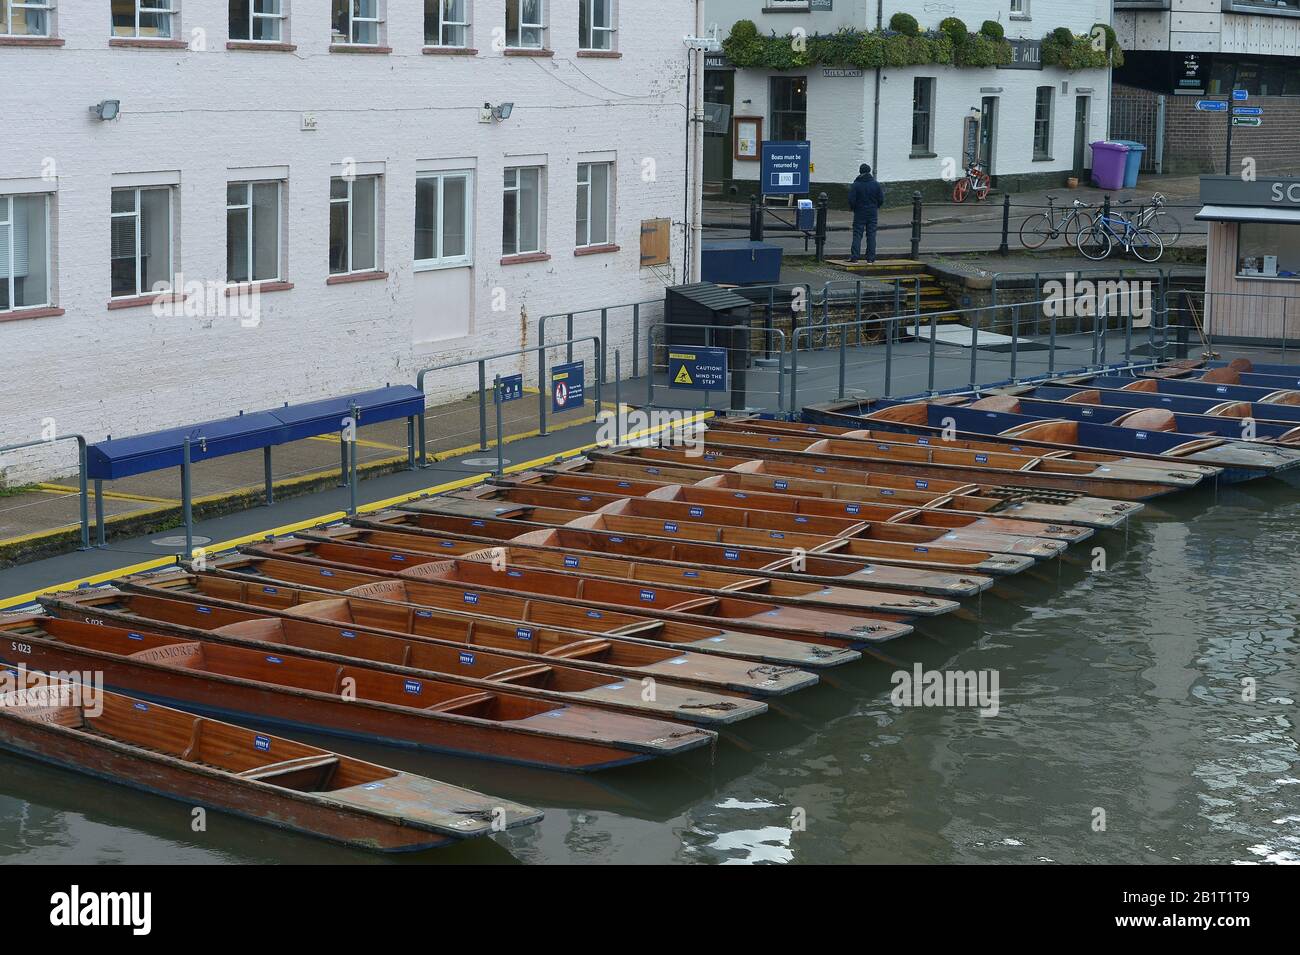 Cambridge England 27th February 2020. Visitors to the City wrap up warm to ride in Punts on the River Cam as snow and sleet cross the UKCambridge Engl Stock Photo